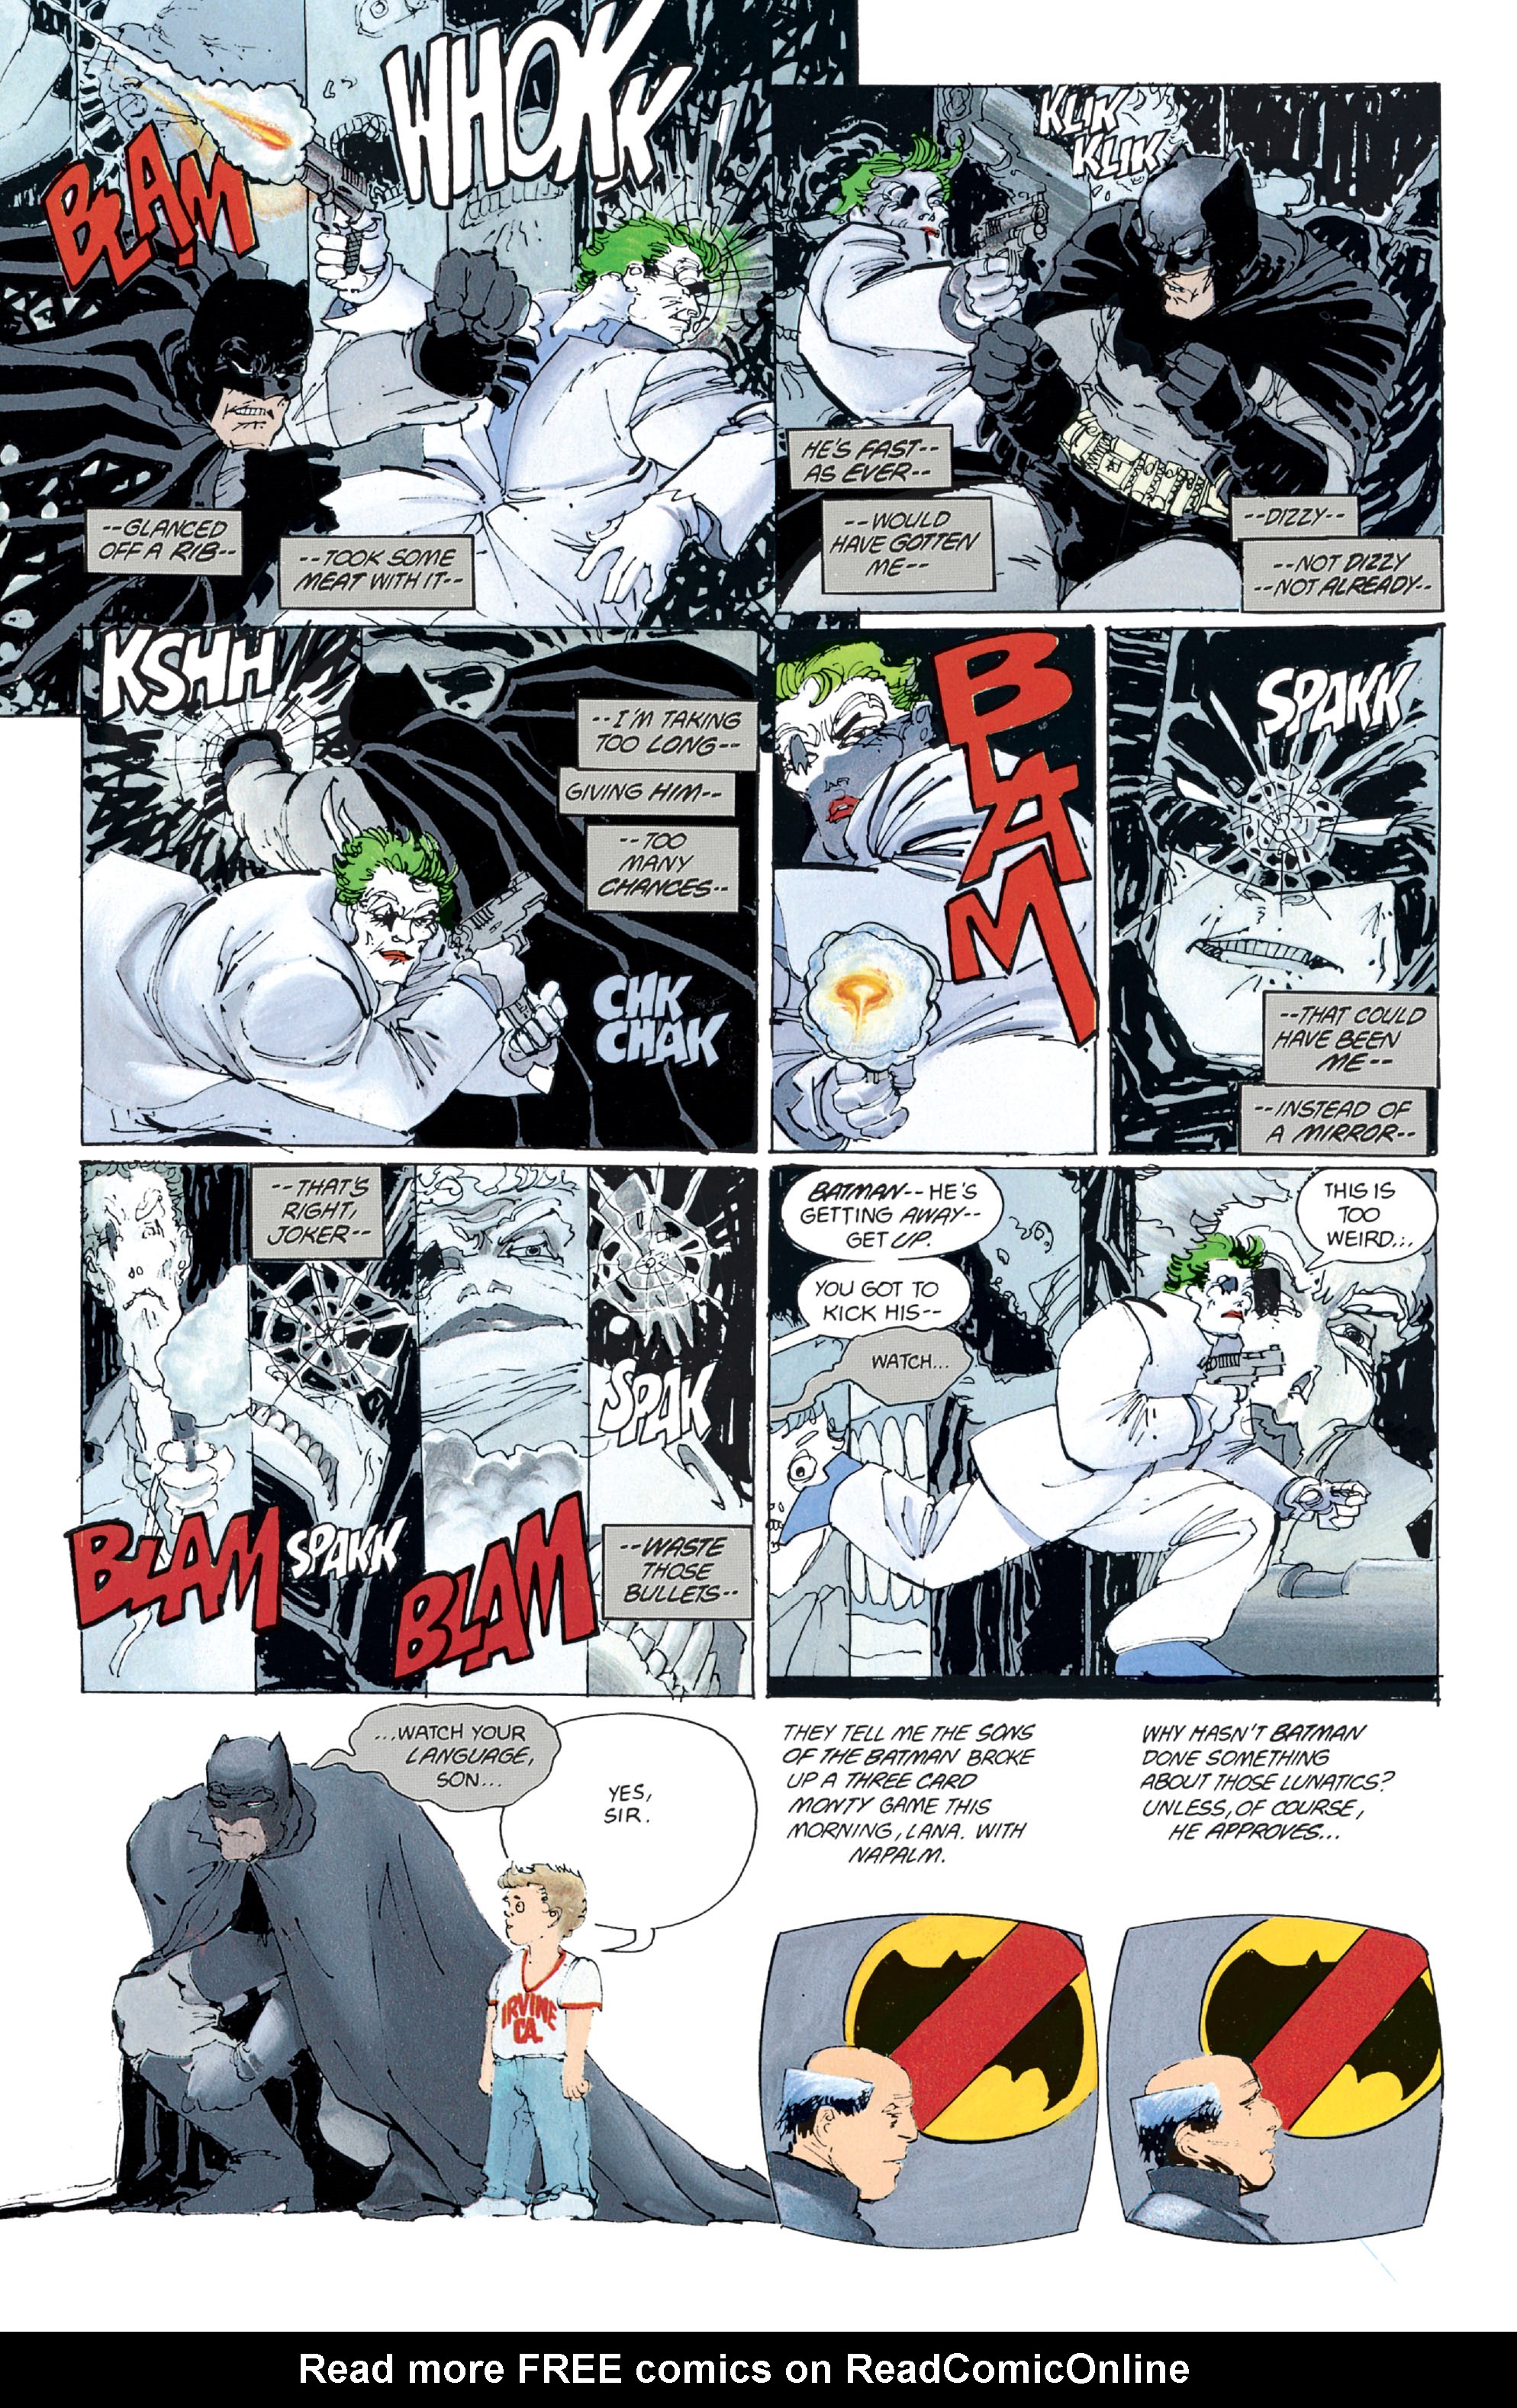 Batman The Dark Knight Returns Issue 3 | Read Batman The Dark Knight Returns  Issue 3 comic online in high quality. Read Full Comic online for free -  Read comics online in